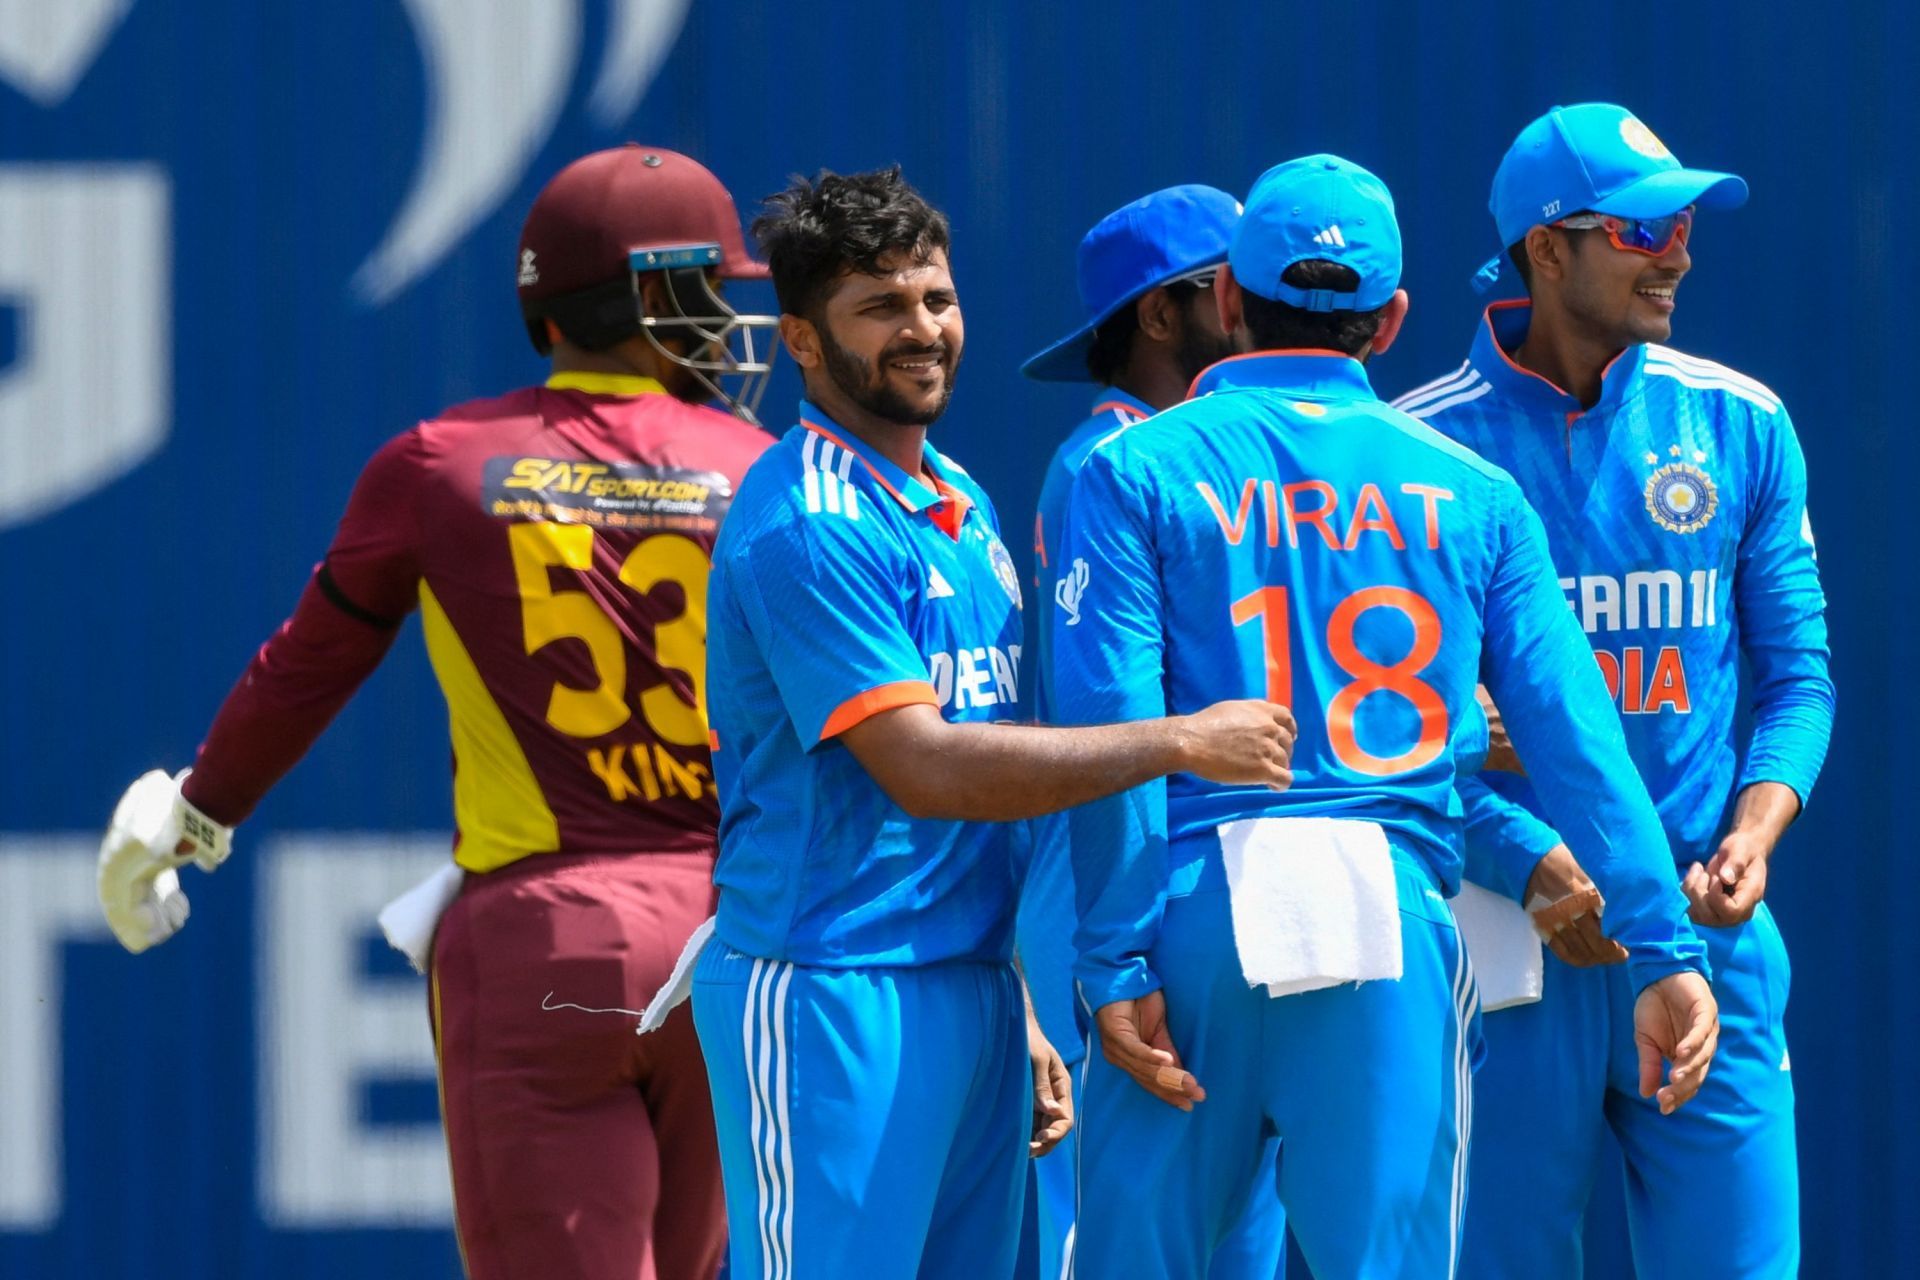 The West Indies gave a dismal batting performance in the first ODI against India. [P/C: BCCI]